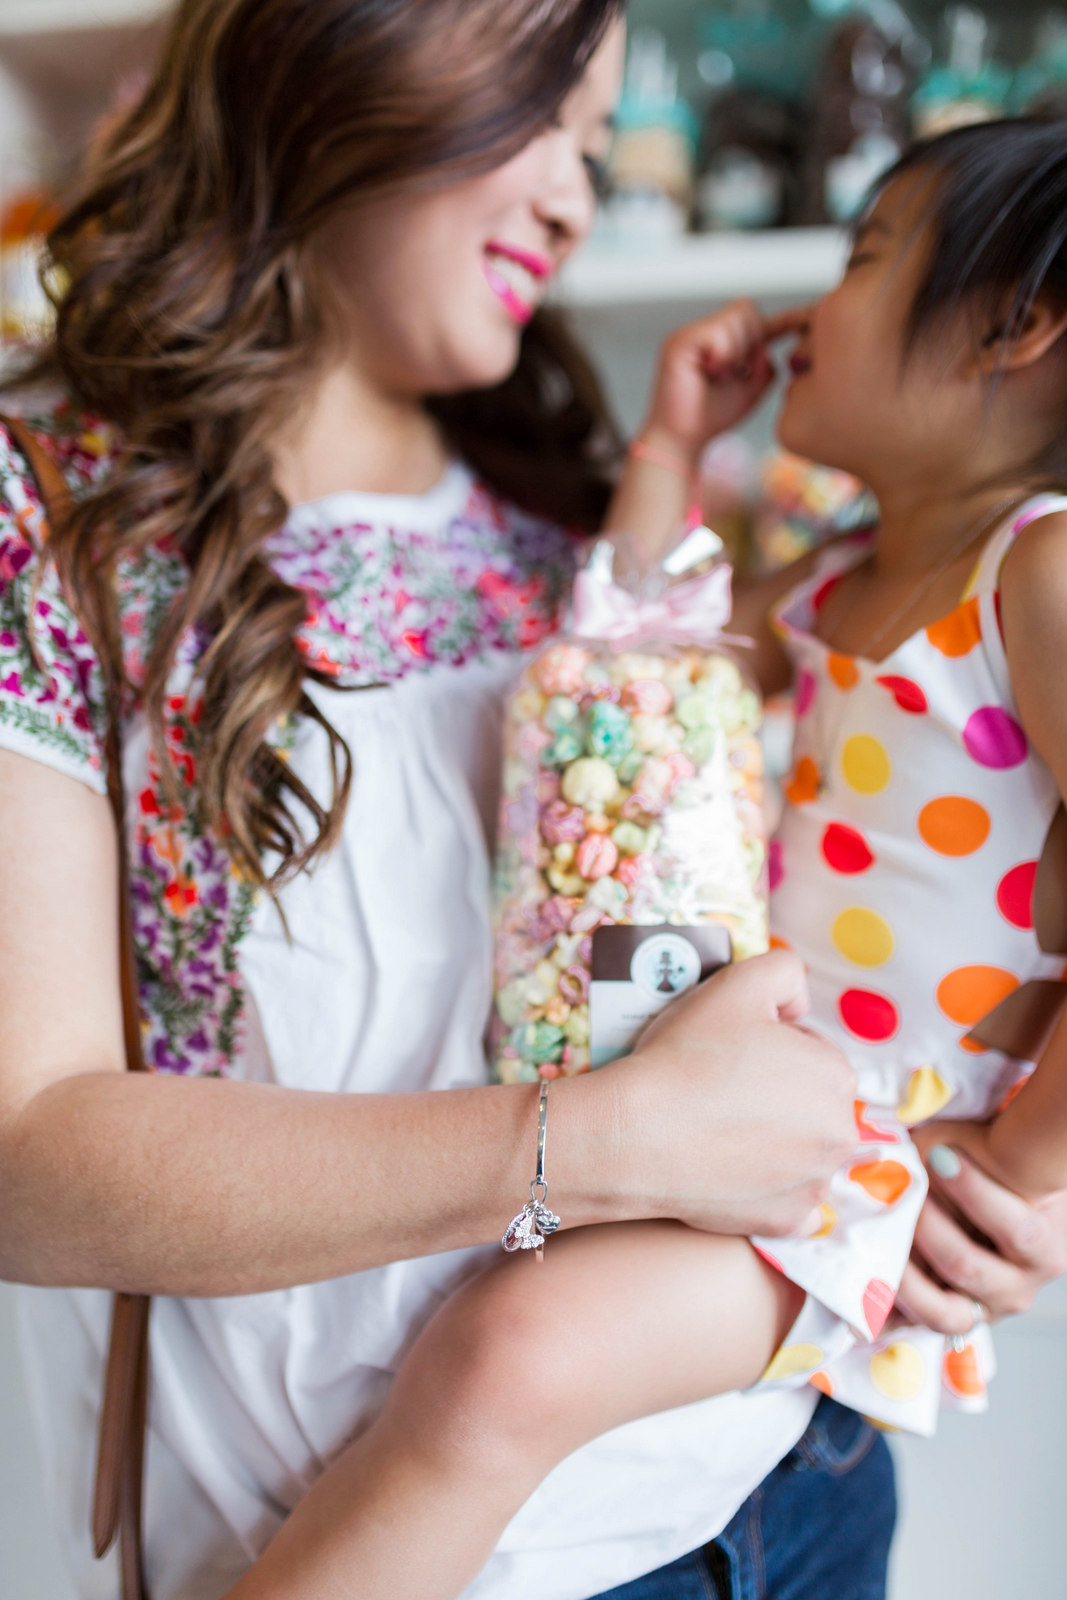 Mommy and Me Outfits: Colorful Floral Top and Polka Dots by fashion blogger Sandy A La Mode